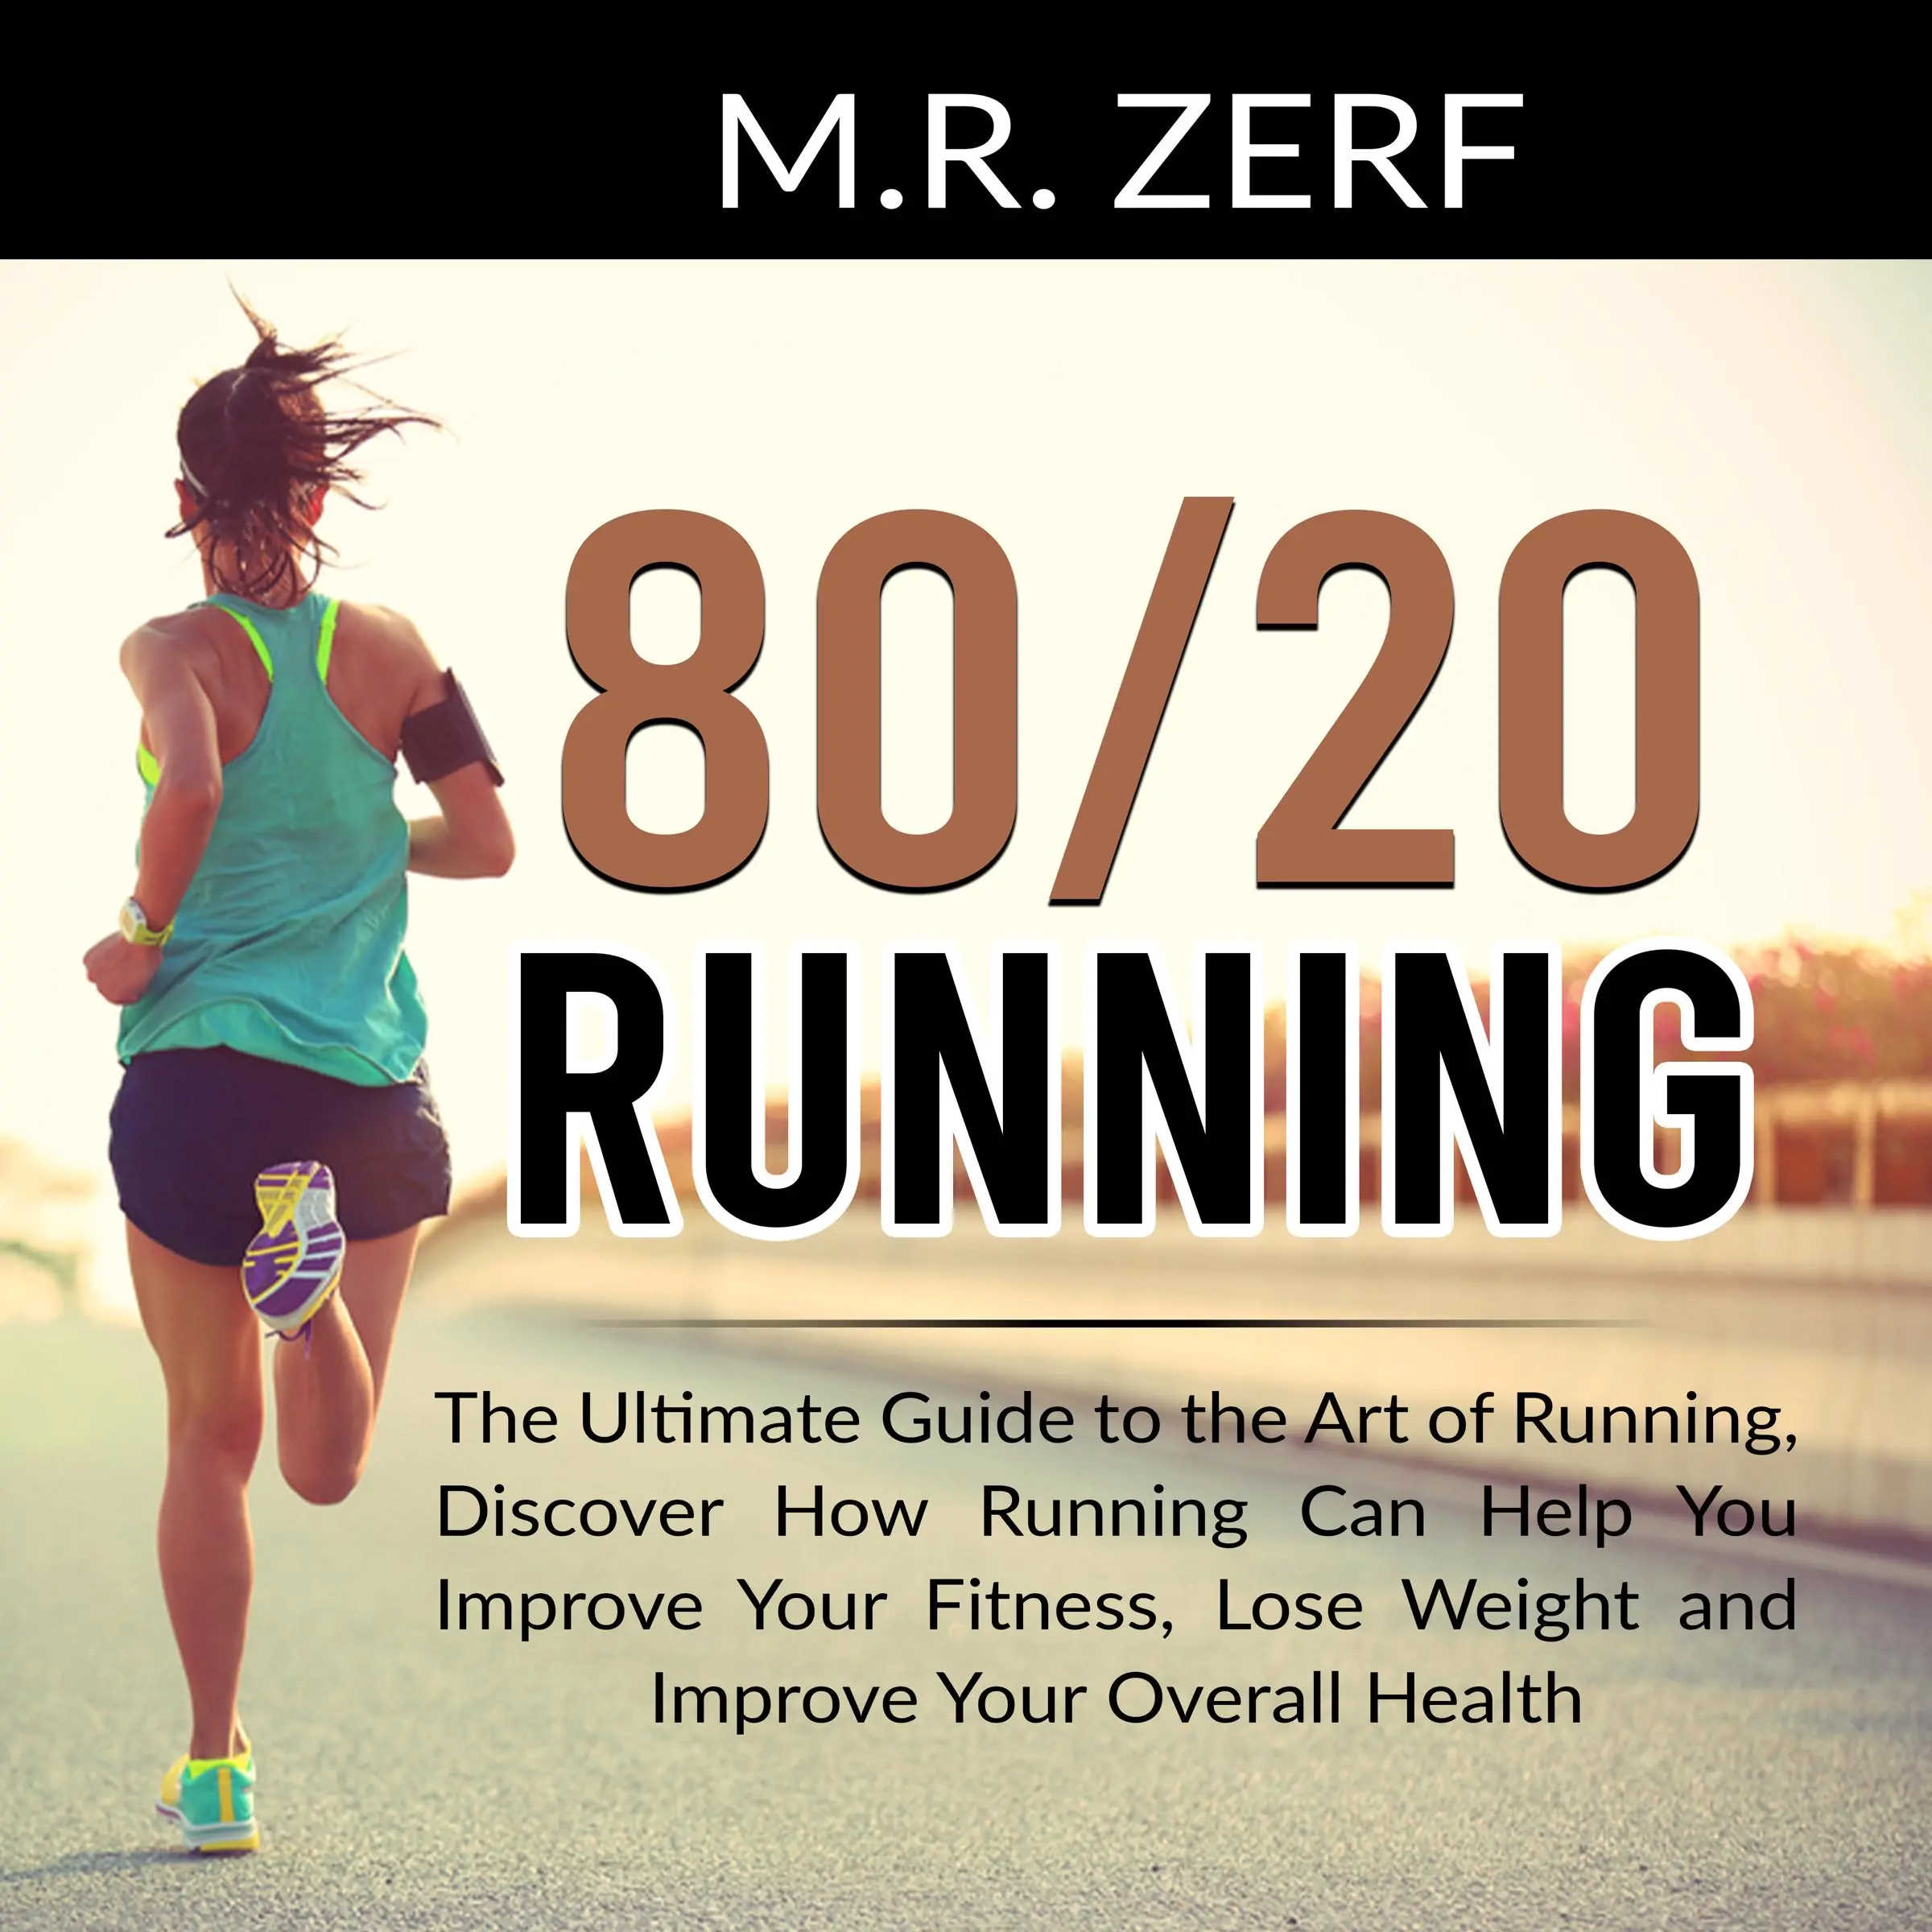 80/20 Running: The Ultimate Guide to the Art of Running, Discover How Running Can Help You Improve Your Fitness, Lose Weight and Improve Your Overall Health Audiobook by M.R. Zerf